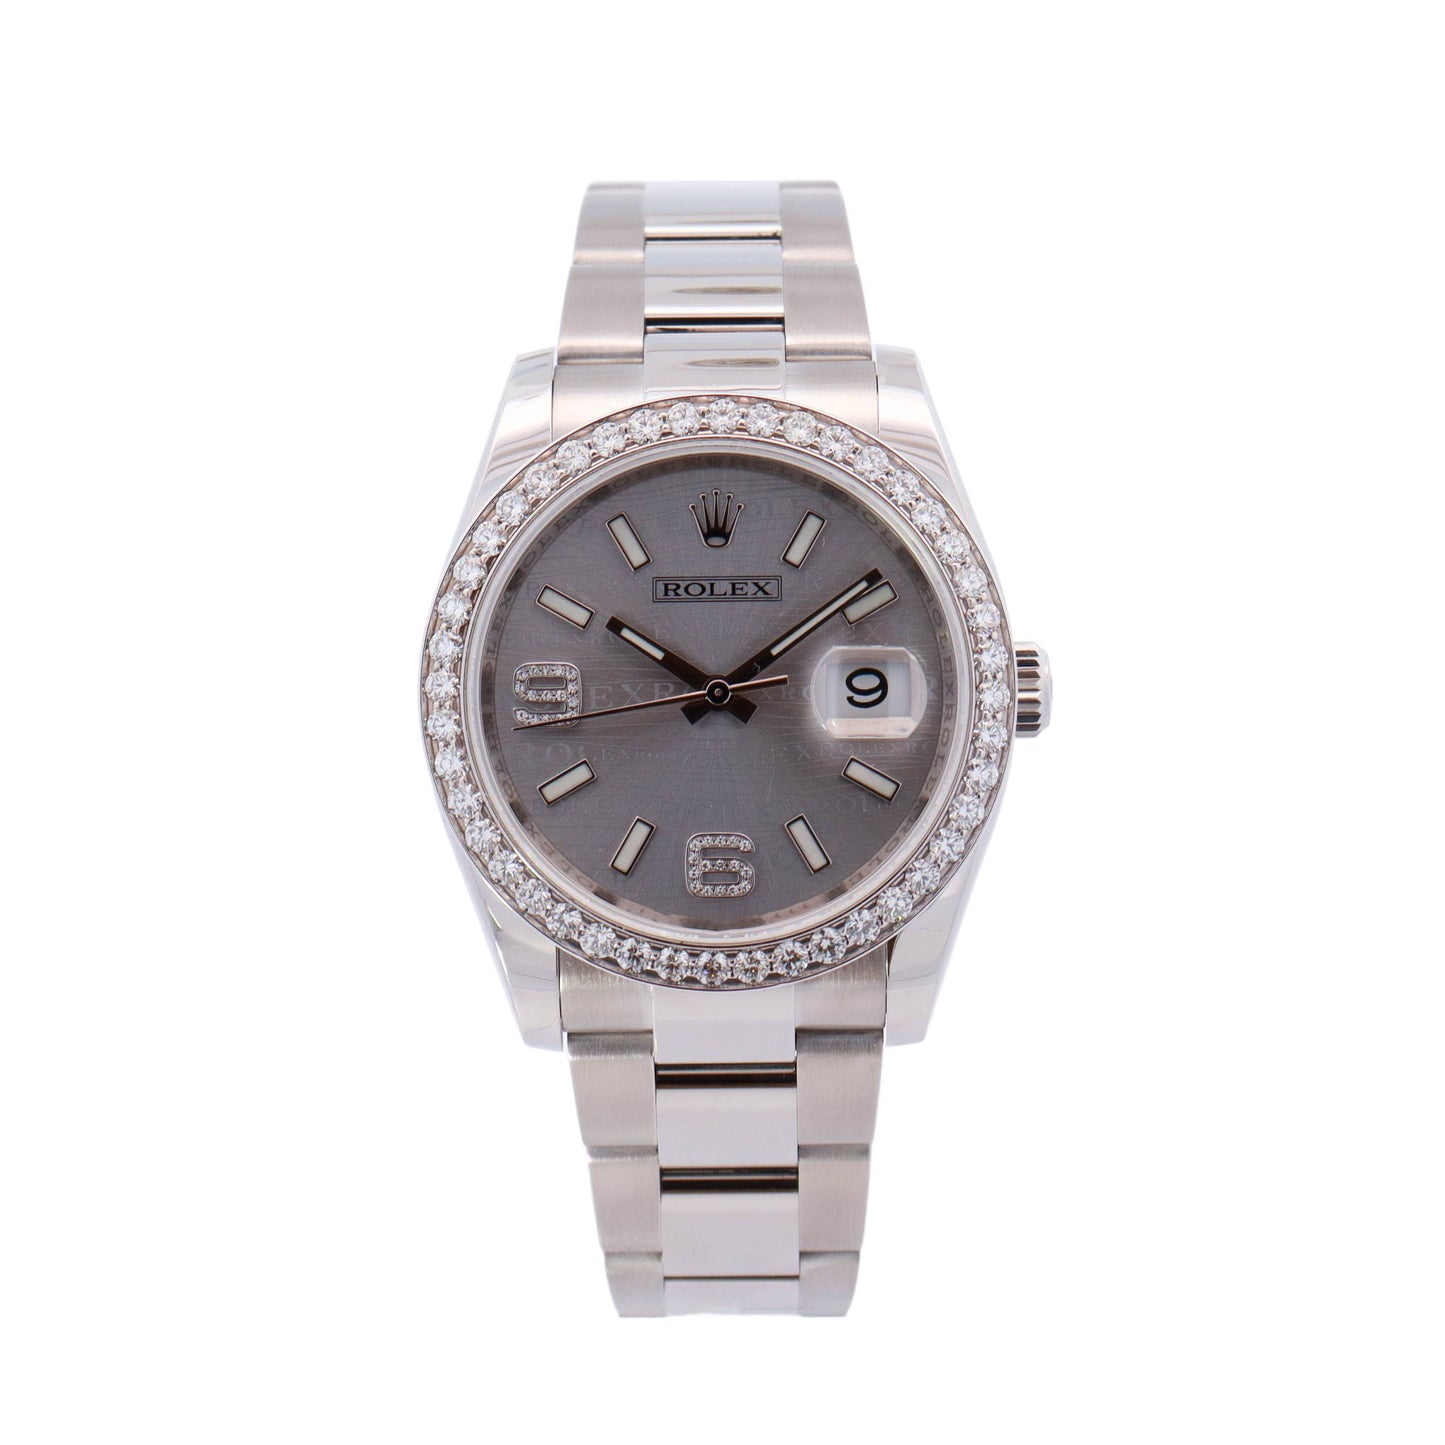 Rolex Datejust Stainless Steel & White Gold 36mm Rhodium-Wave Stick Dial Watch Reference# 116234 - Happy Jewelers Fine Jewelry Lifetime Warranty